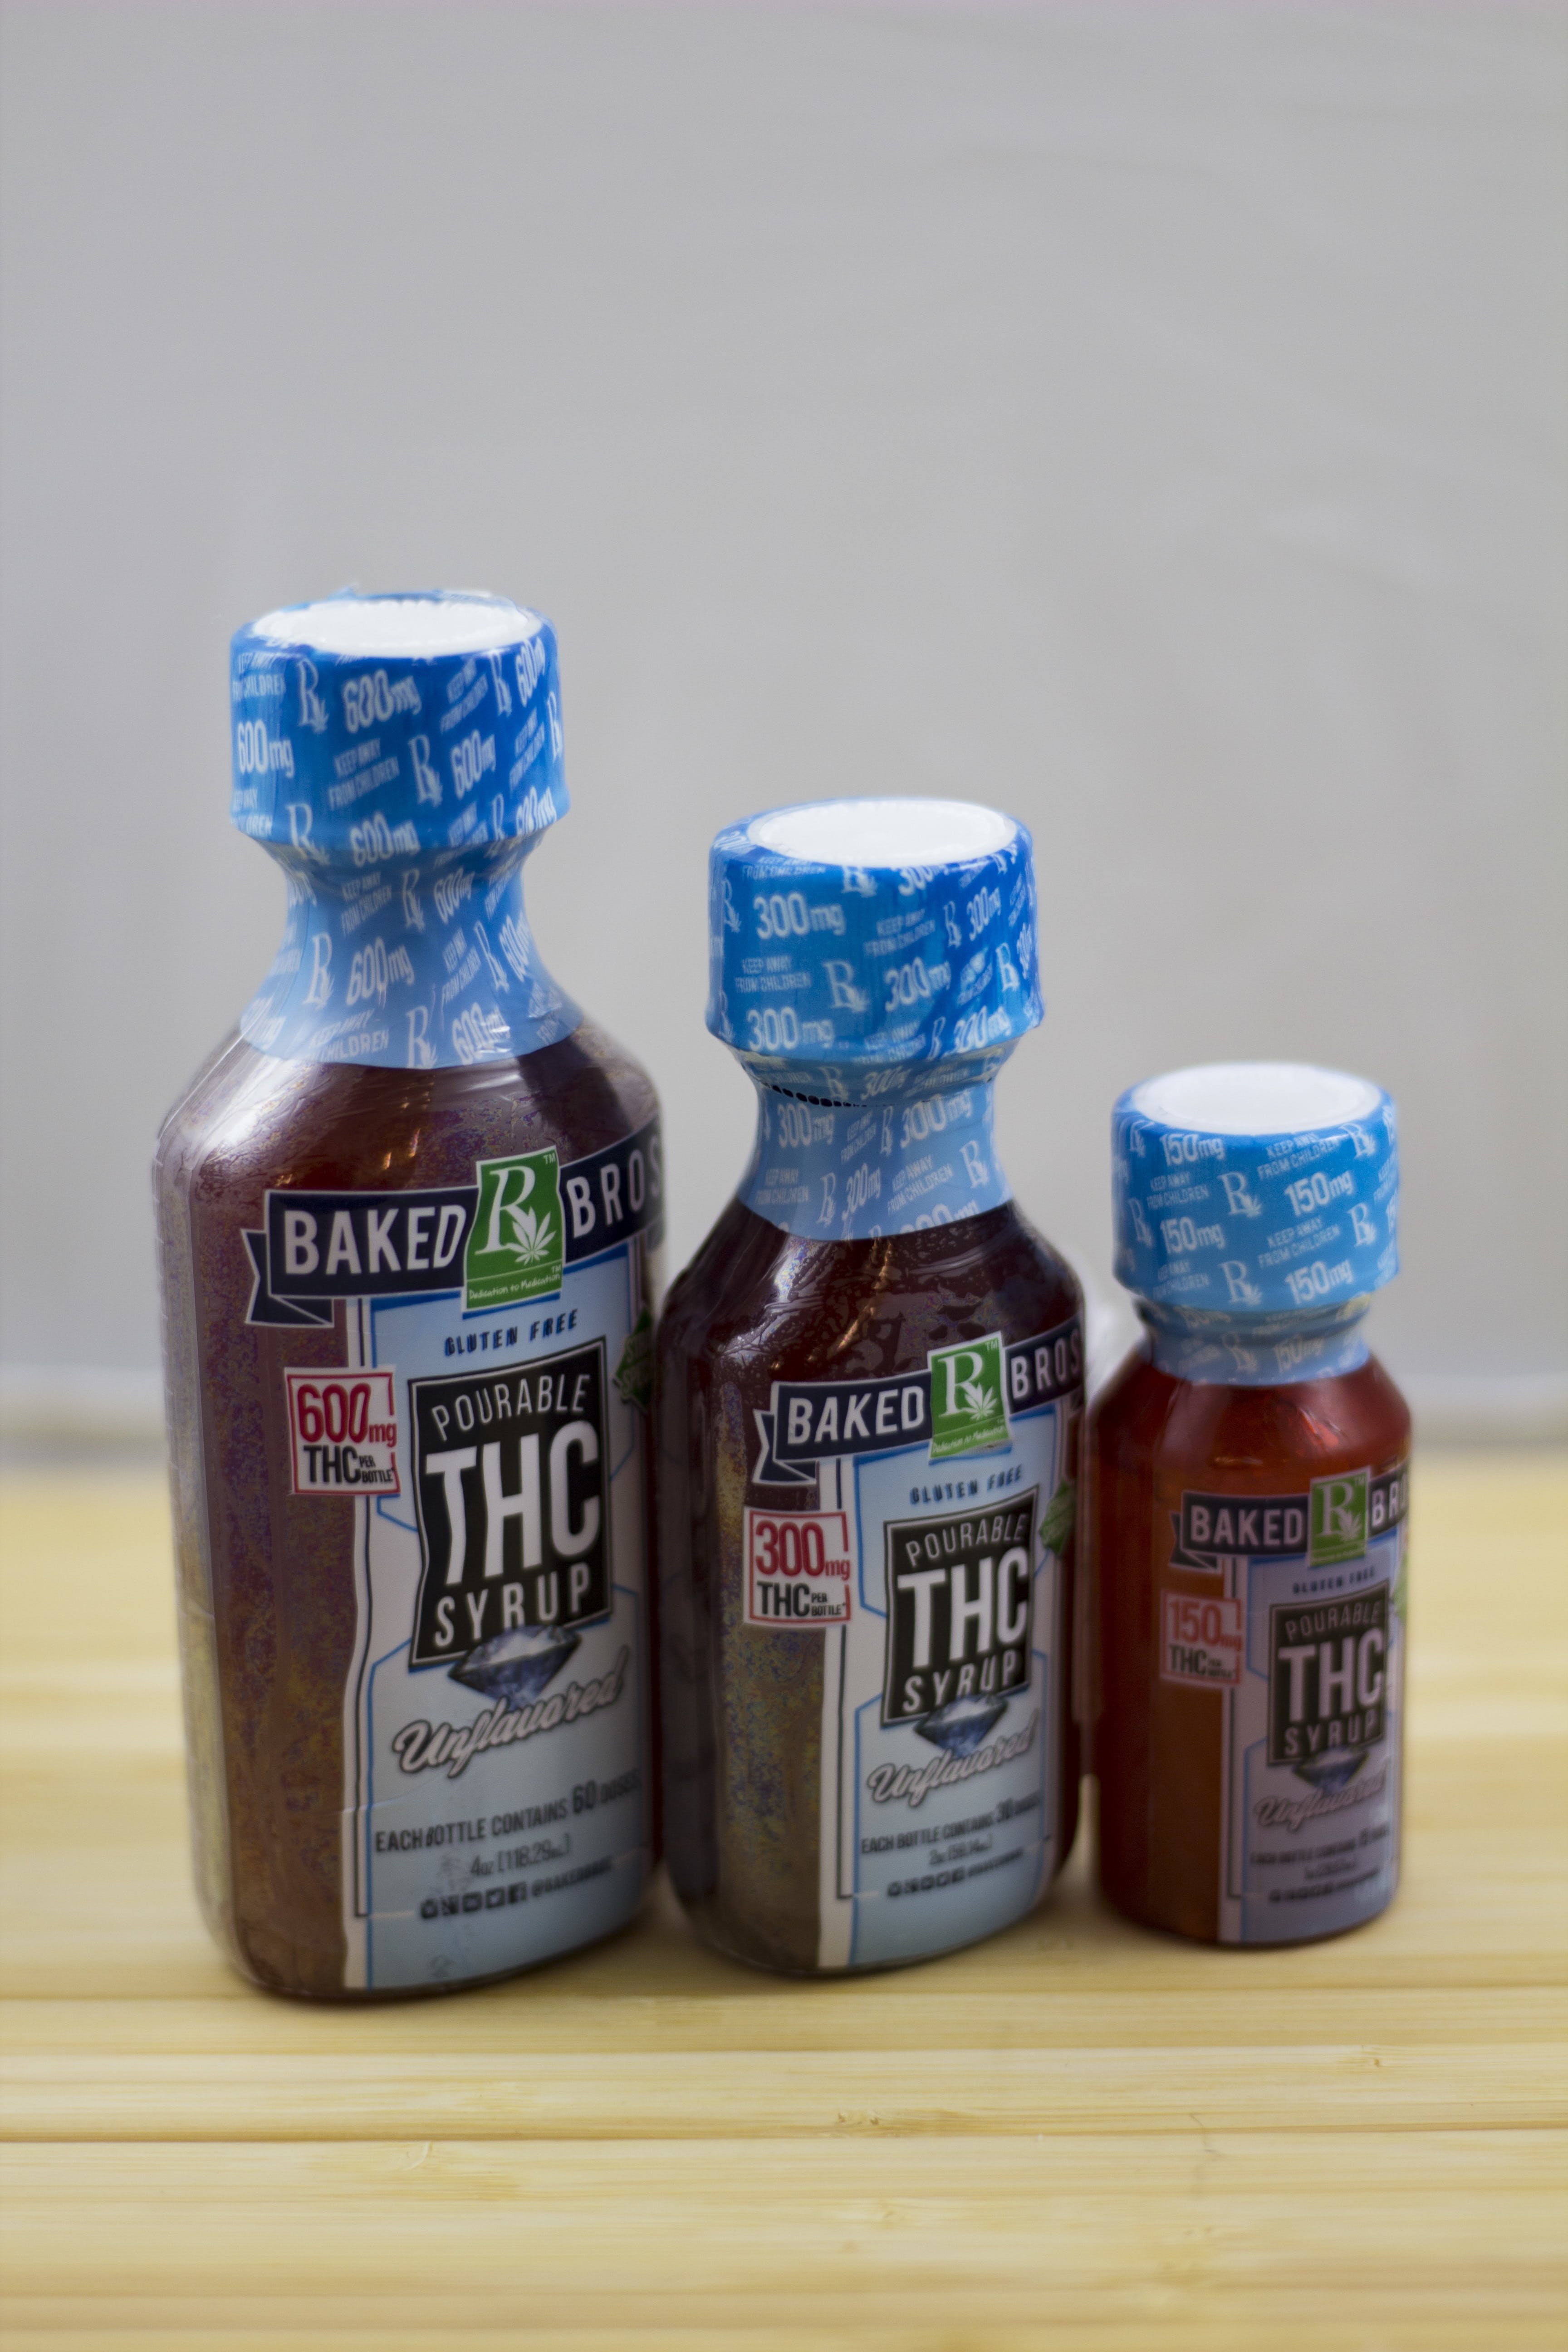 edible-baked-bros-thc-unflavored-syrup-300mg